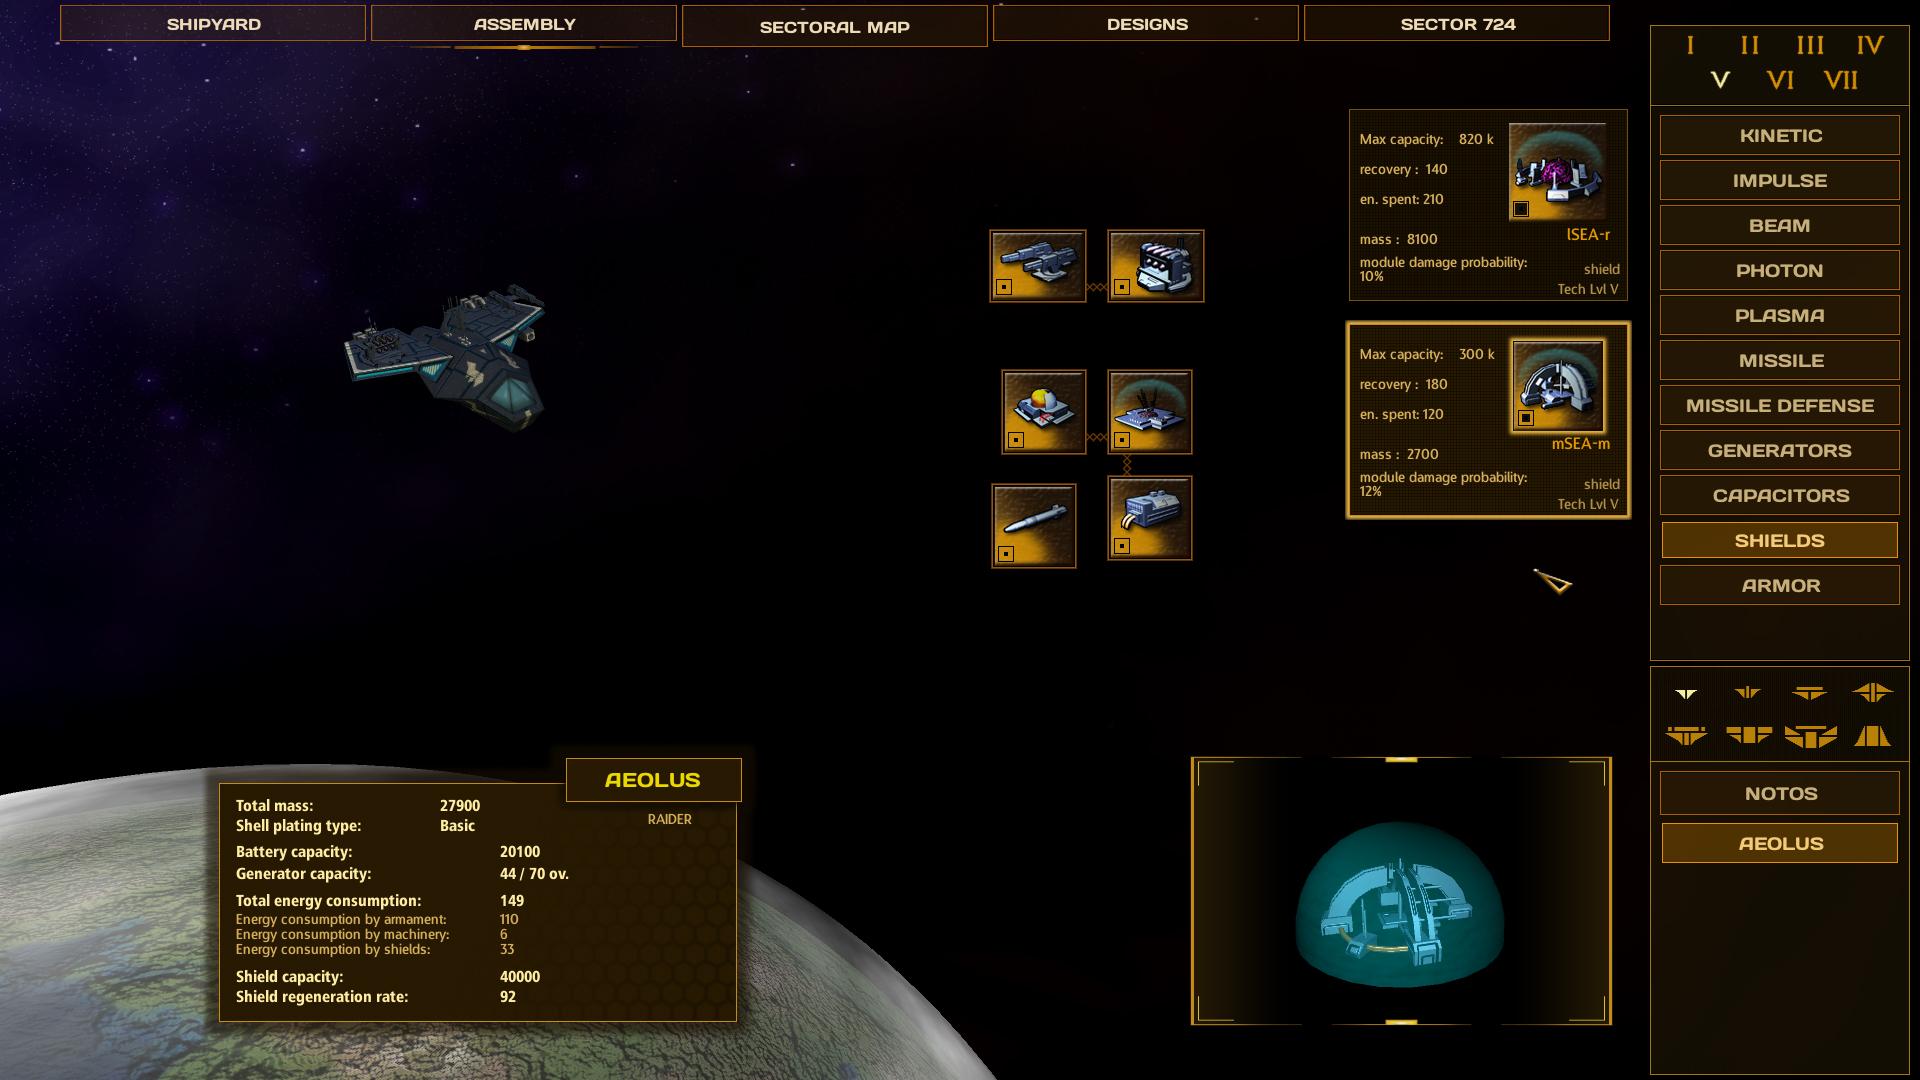 Screenshot №4 from game Sector 724